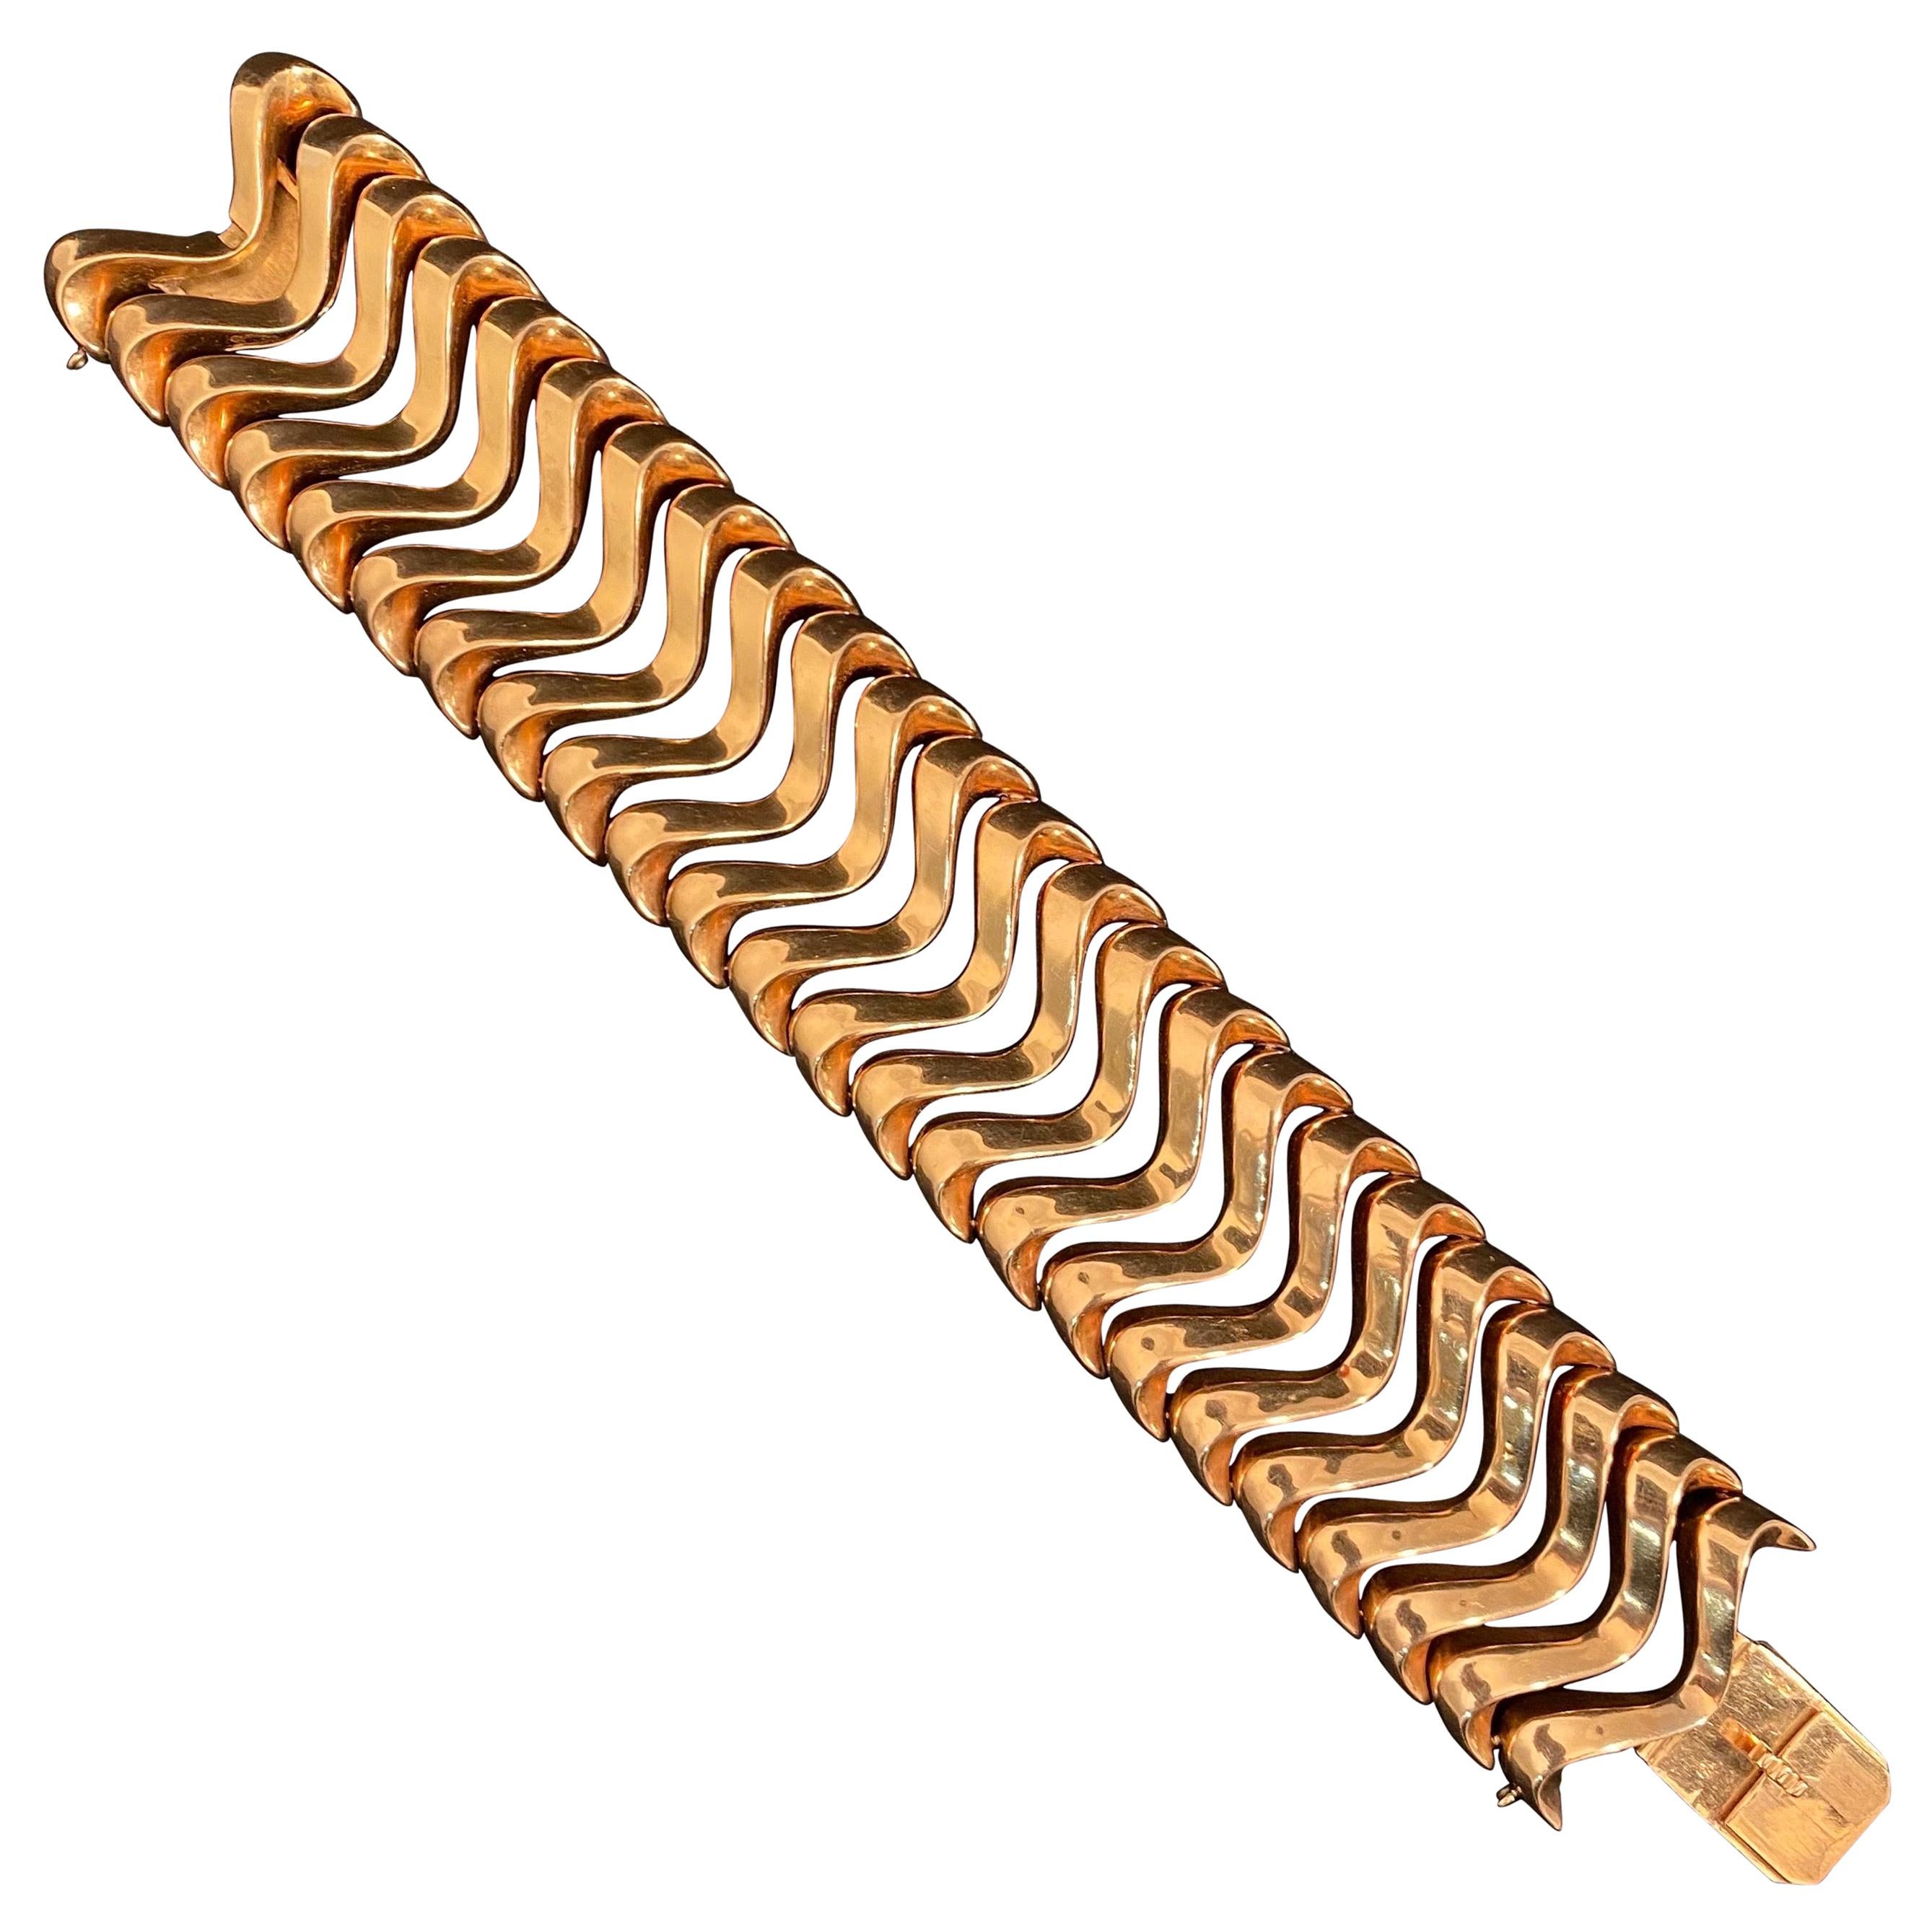 Midcentury 1940s-1950s Wide Articulated Bracelet in 18 Karat Rose Gold French